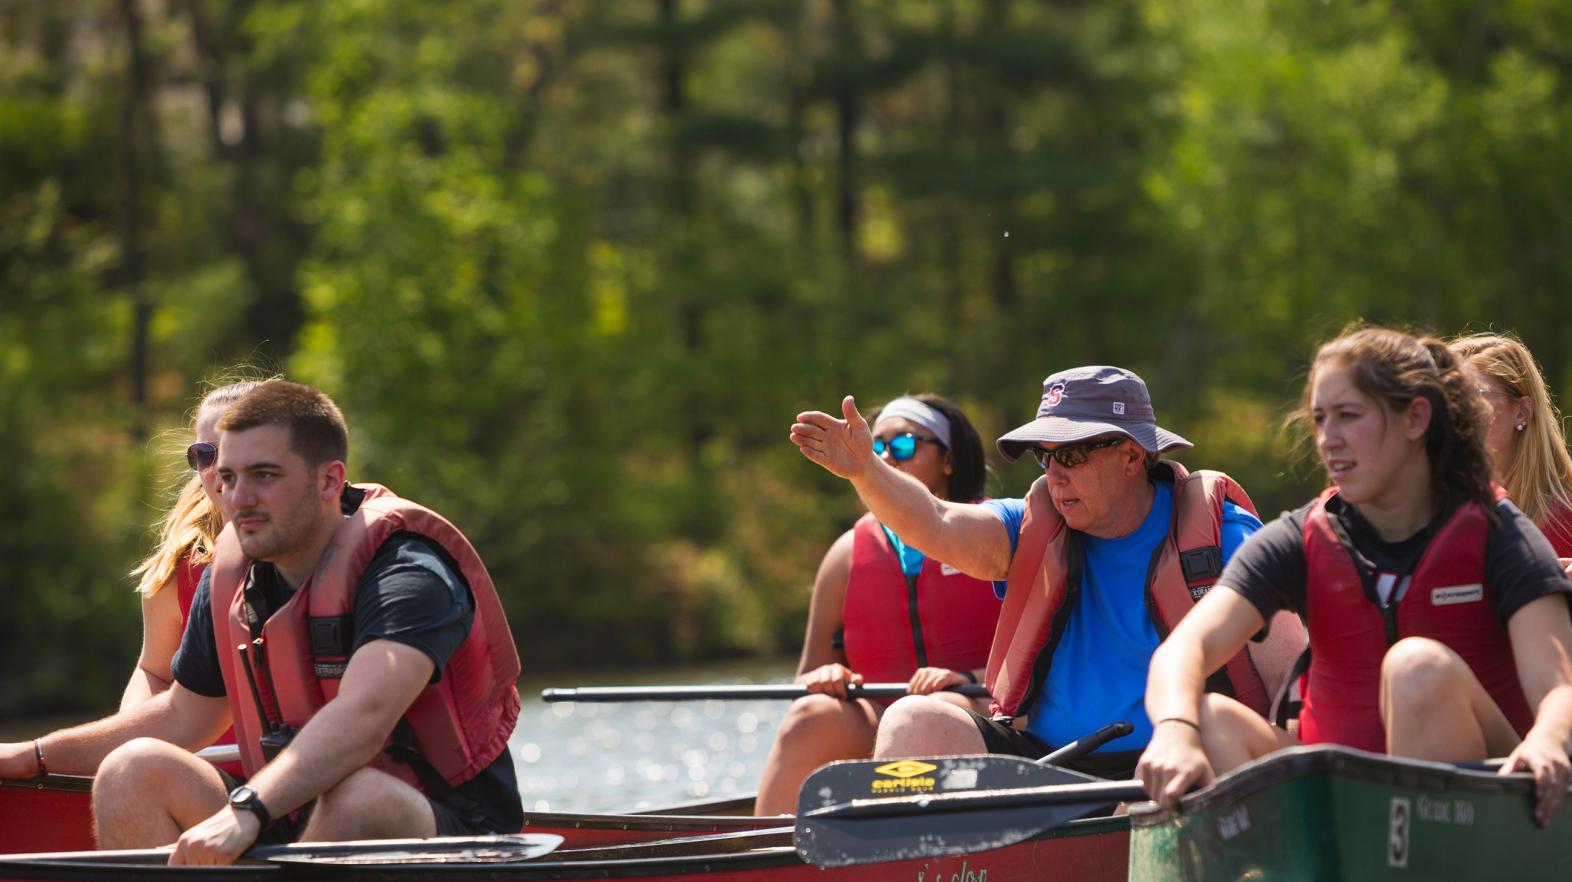 Students learn to canoe on Lake Massasoit during Outdoor Pursuits at Springfield College